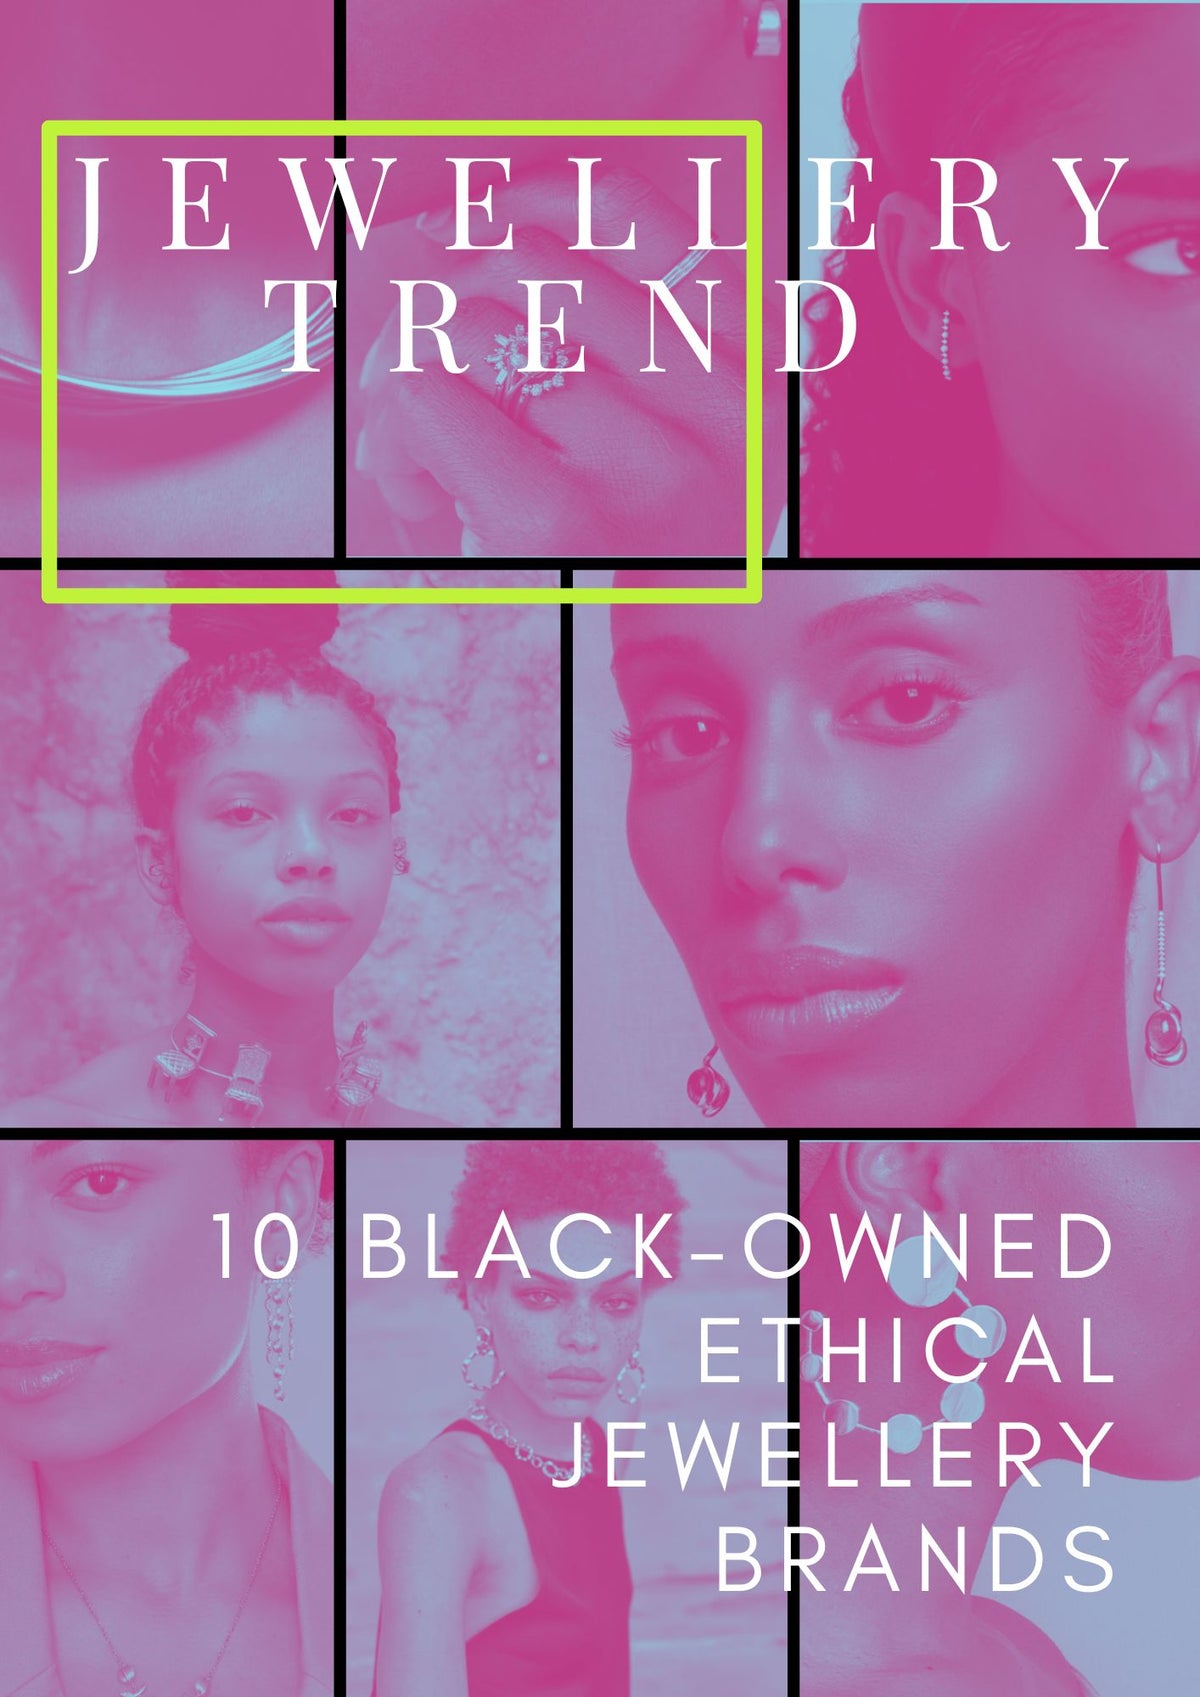 Celebrating Diversity: 10 Black-Owned Ethical Jewellery Brands Making Their Mark